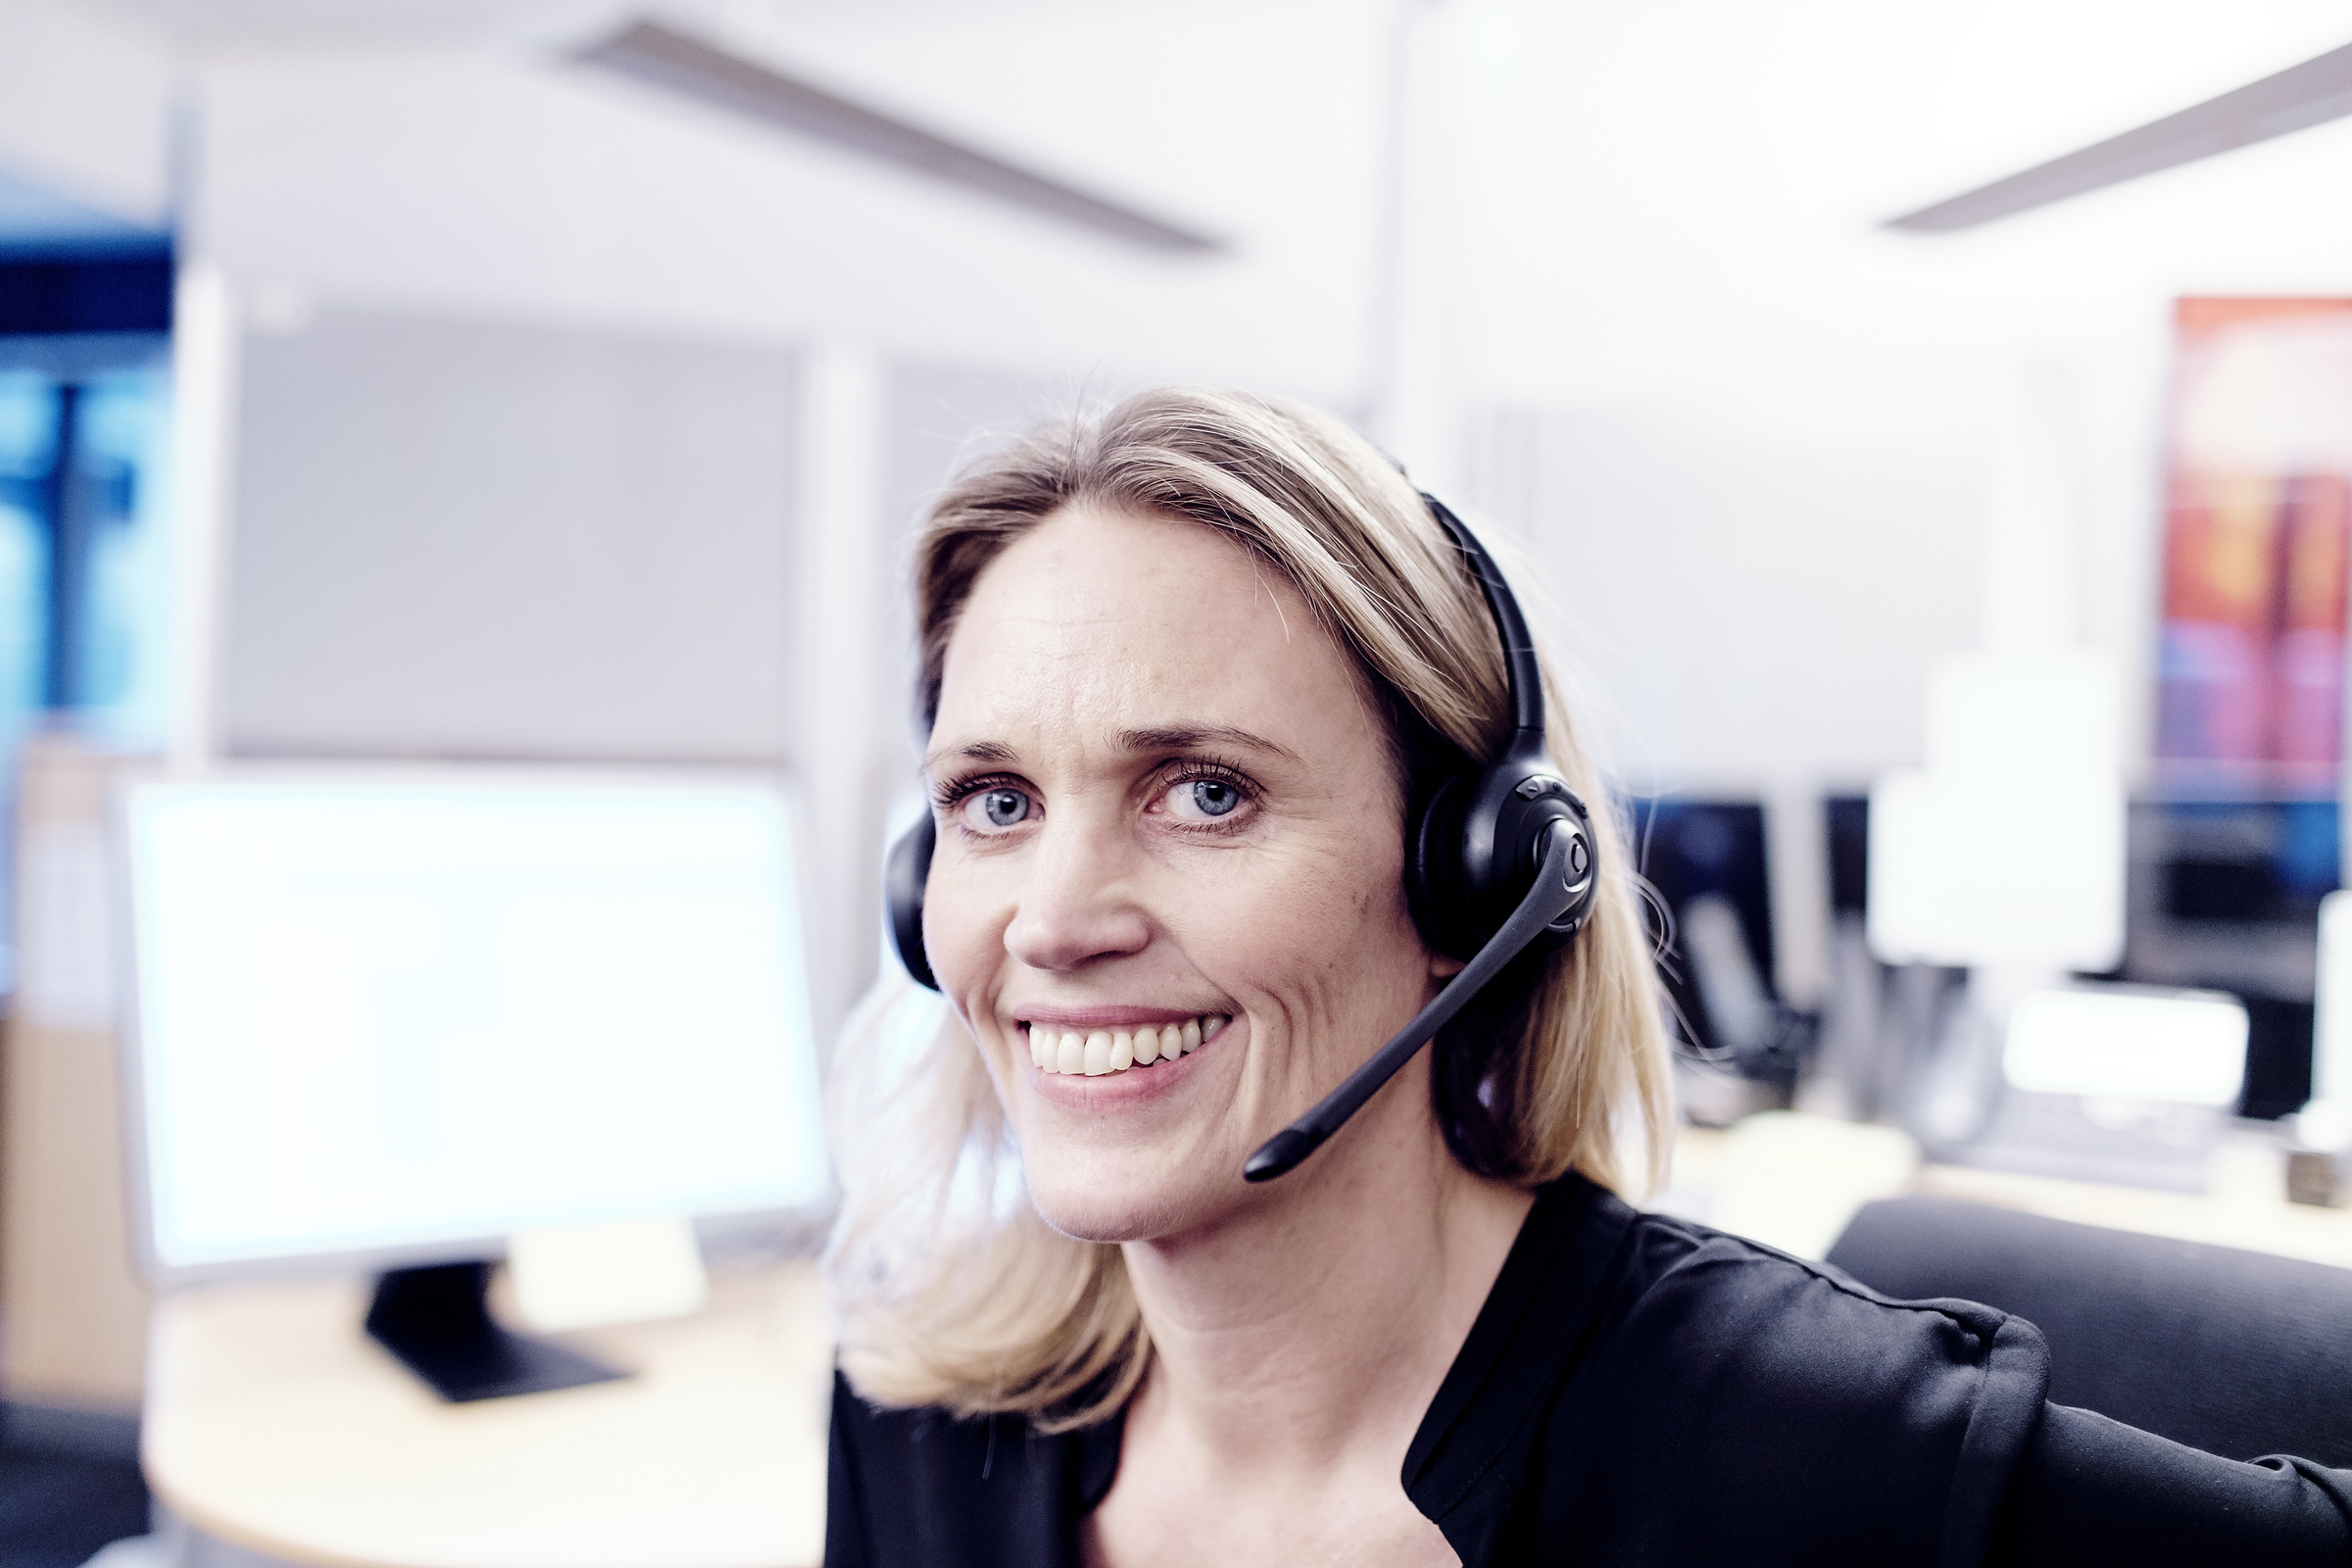 Call center. Woman with headset